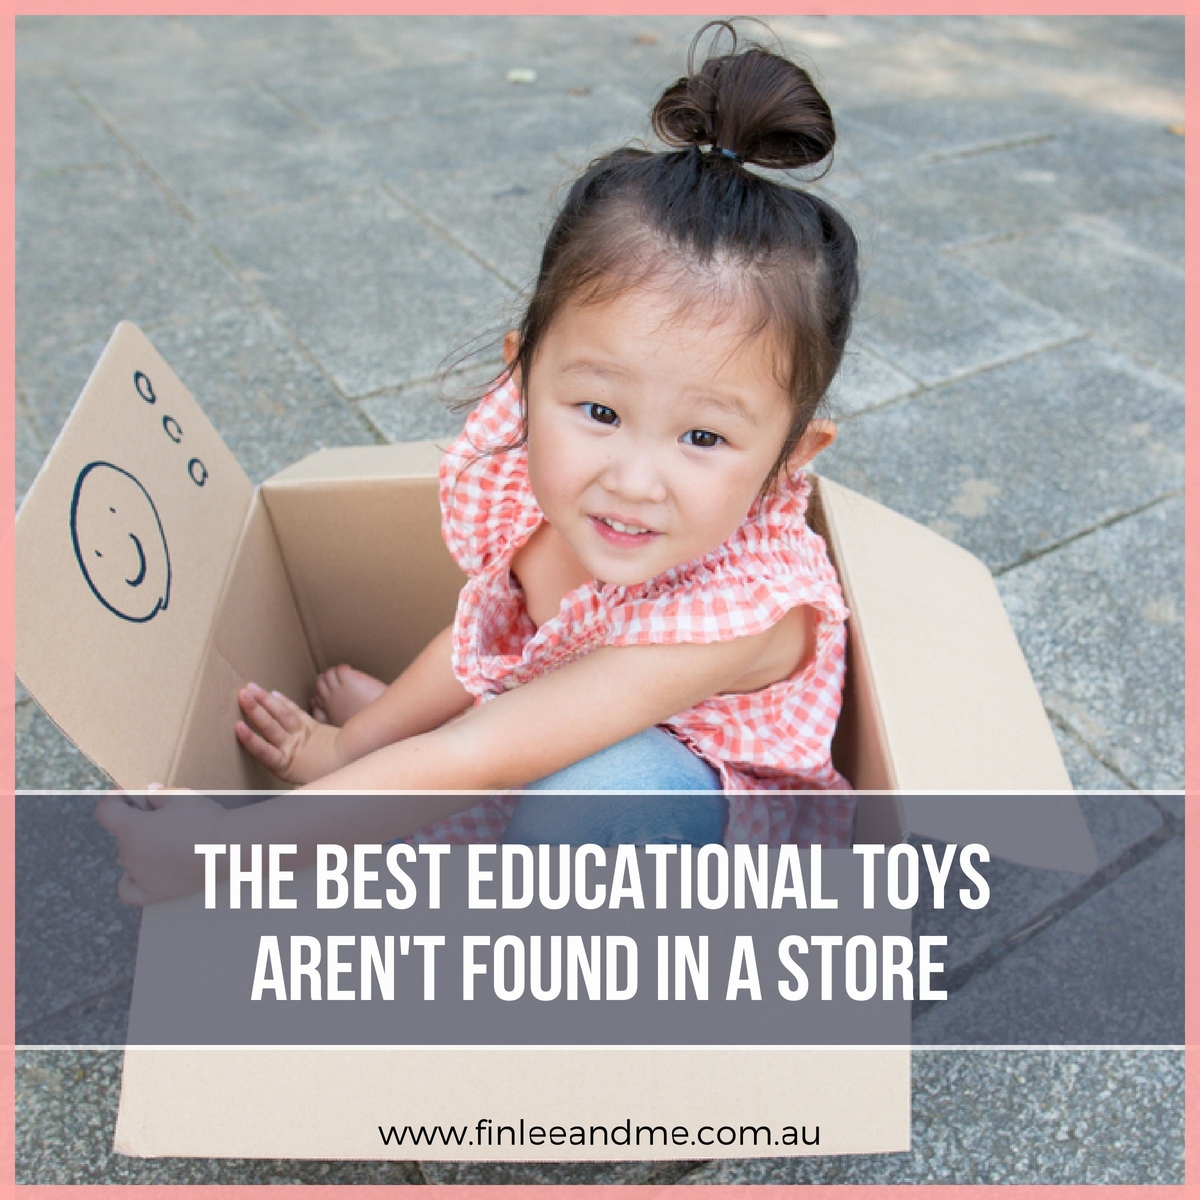 The Best Learning Toys for Toddlers Aren’t Found in a Store